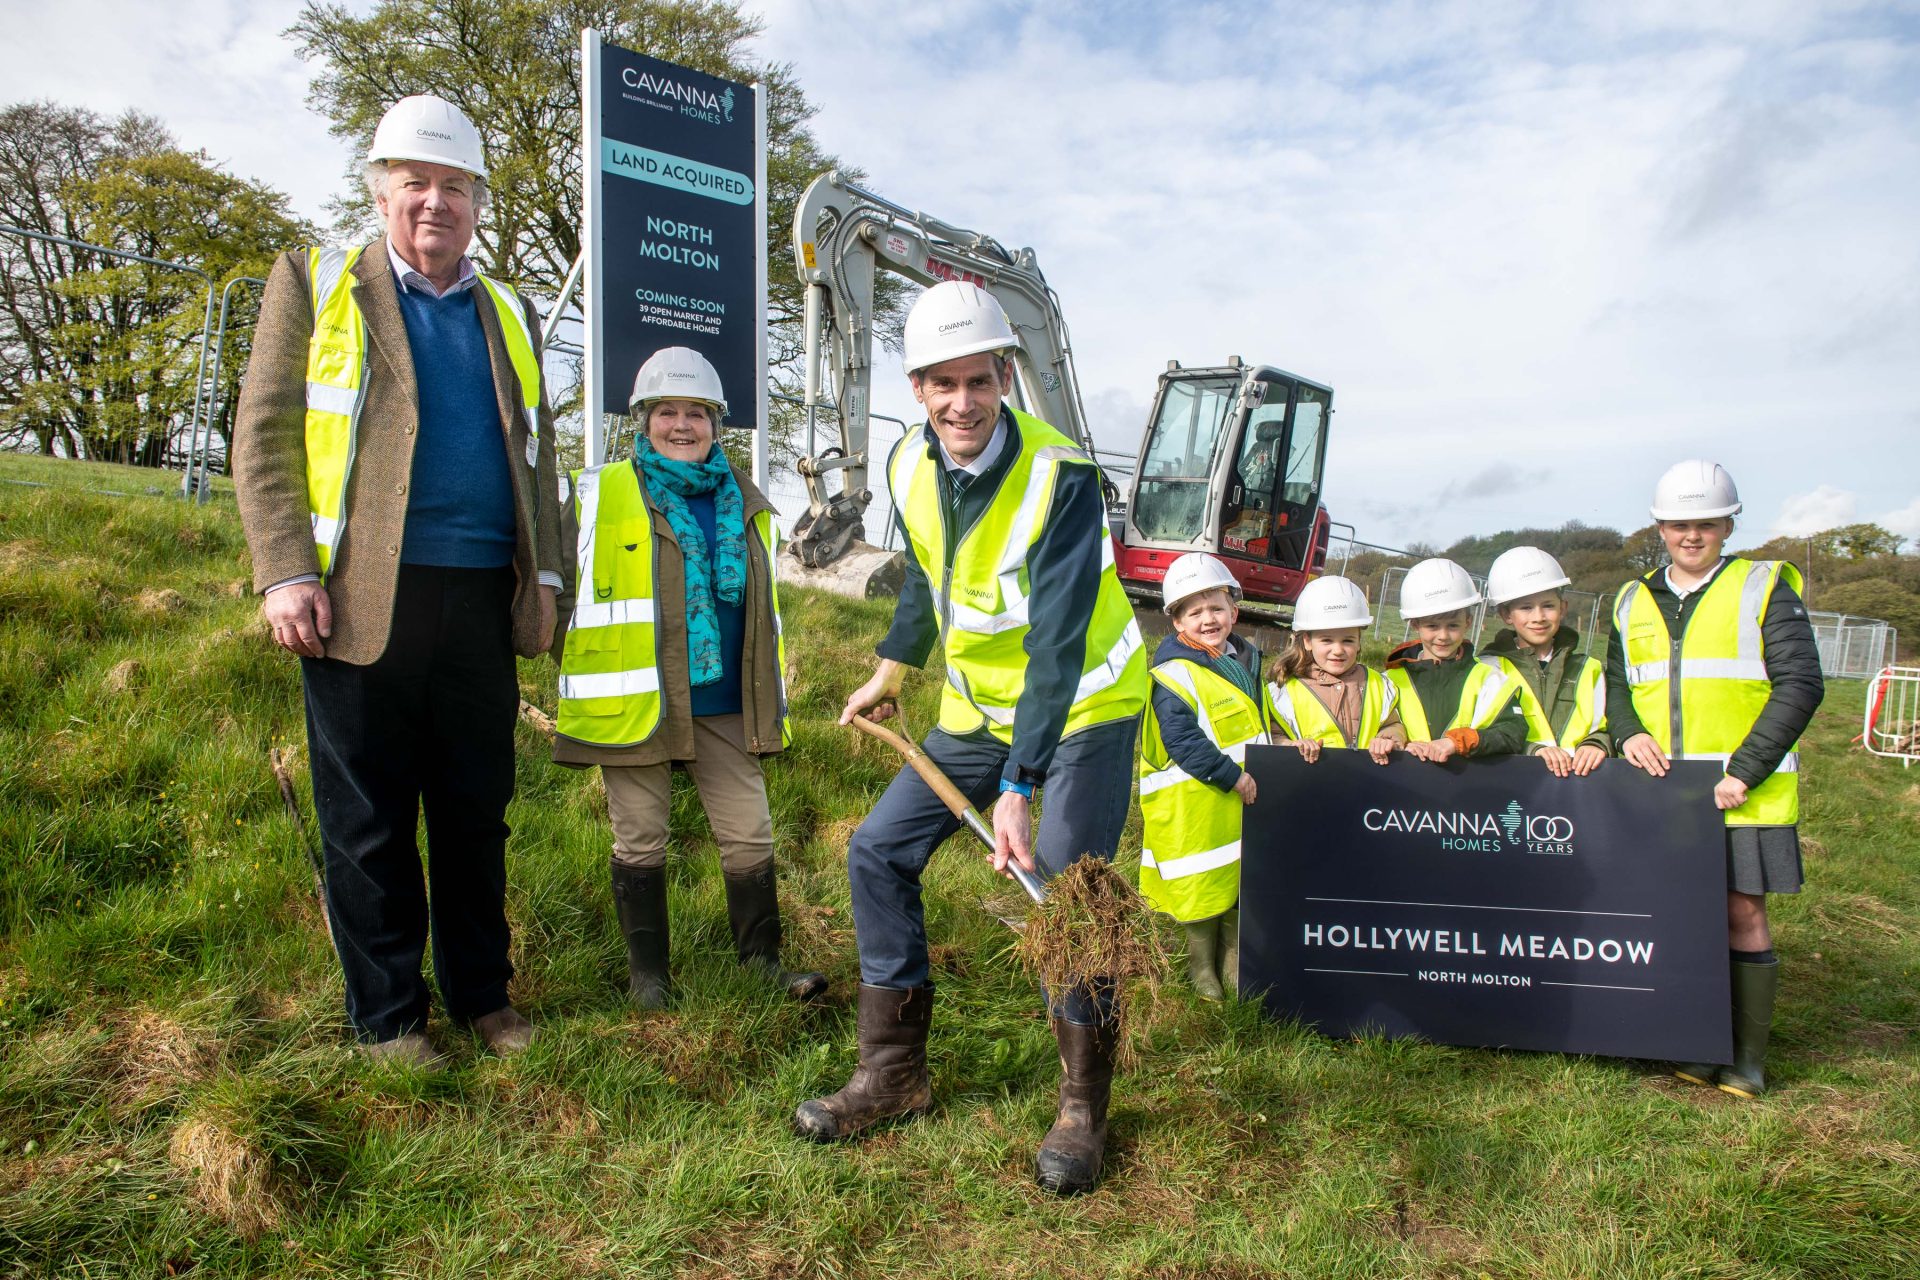 The first turf cut at Hollywell Meadow (group) Cavanna Homes